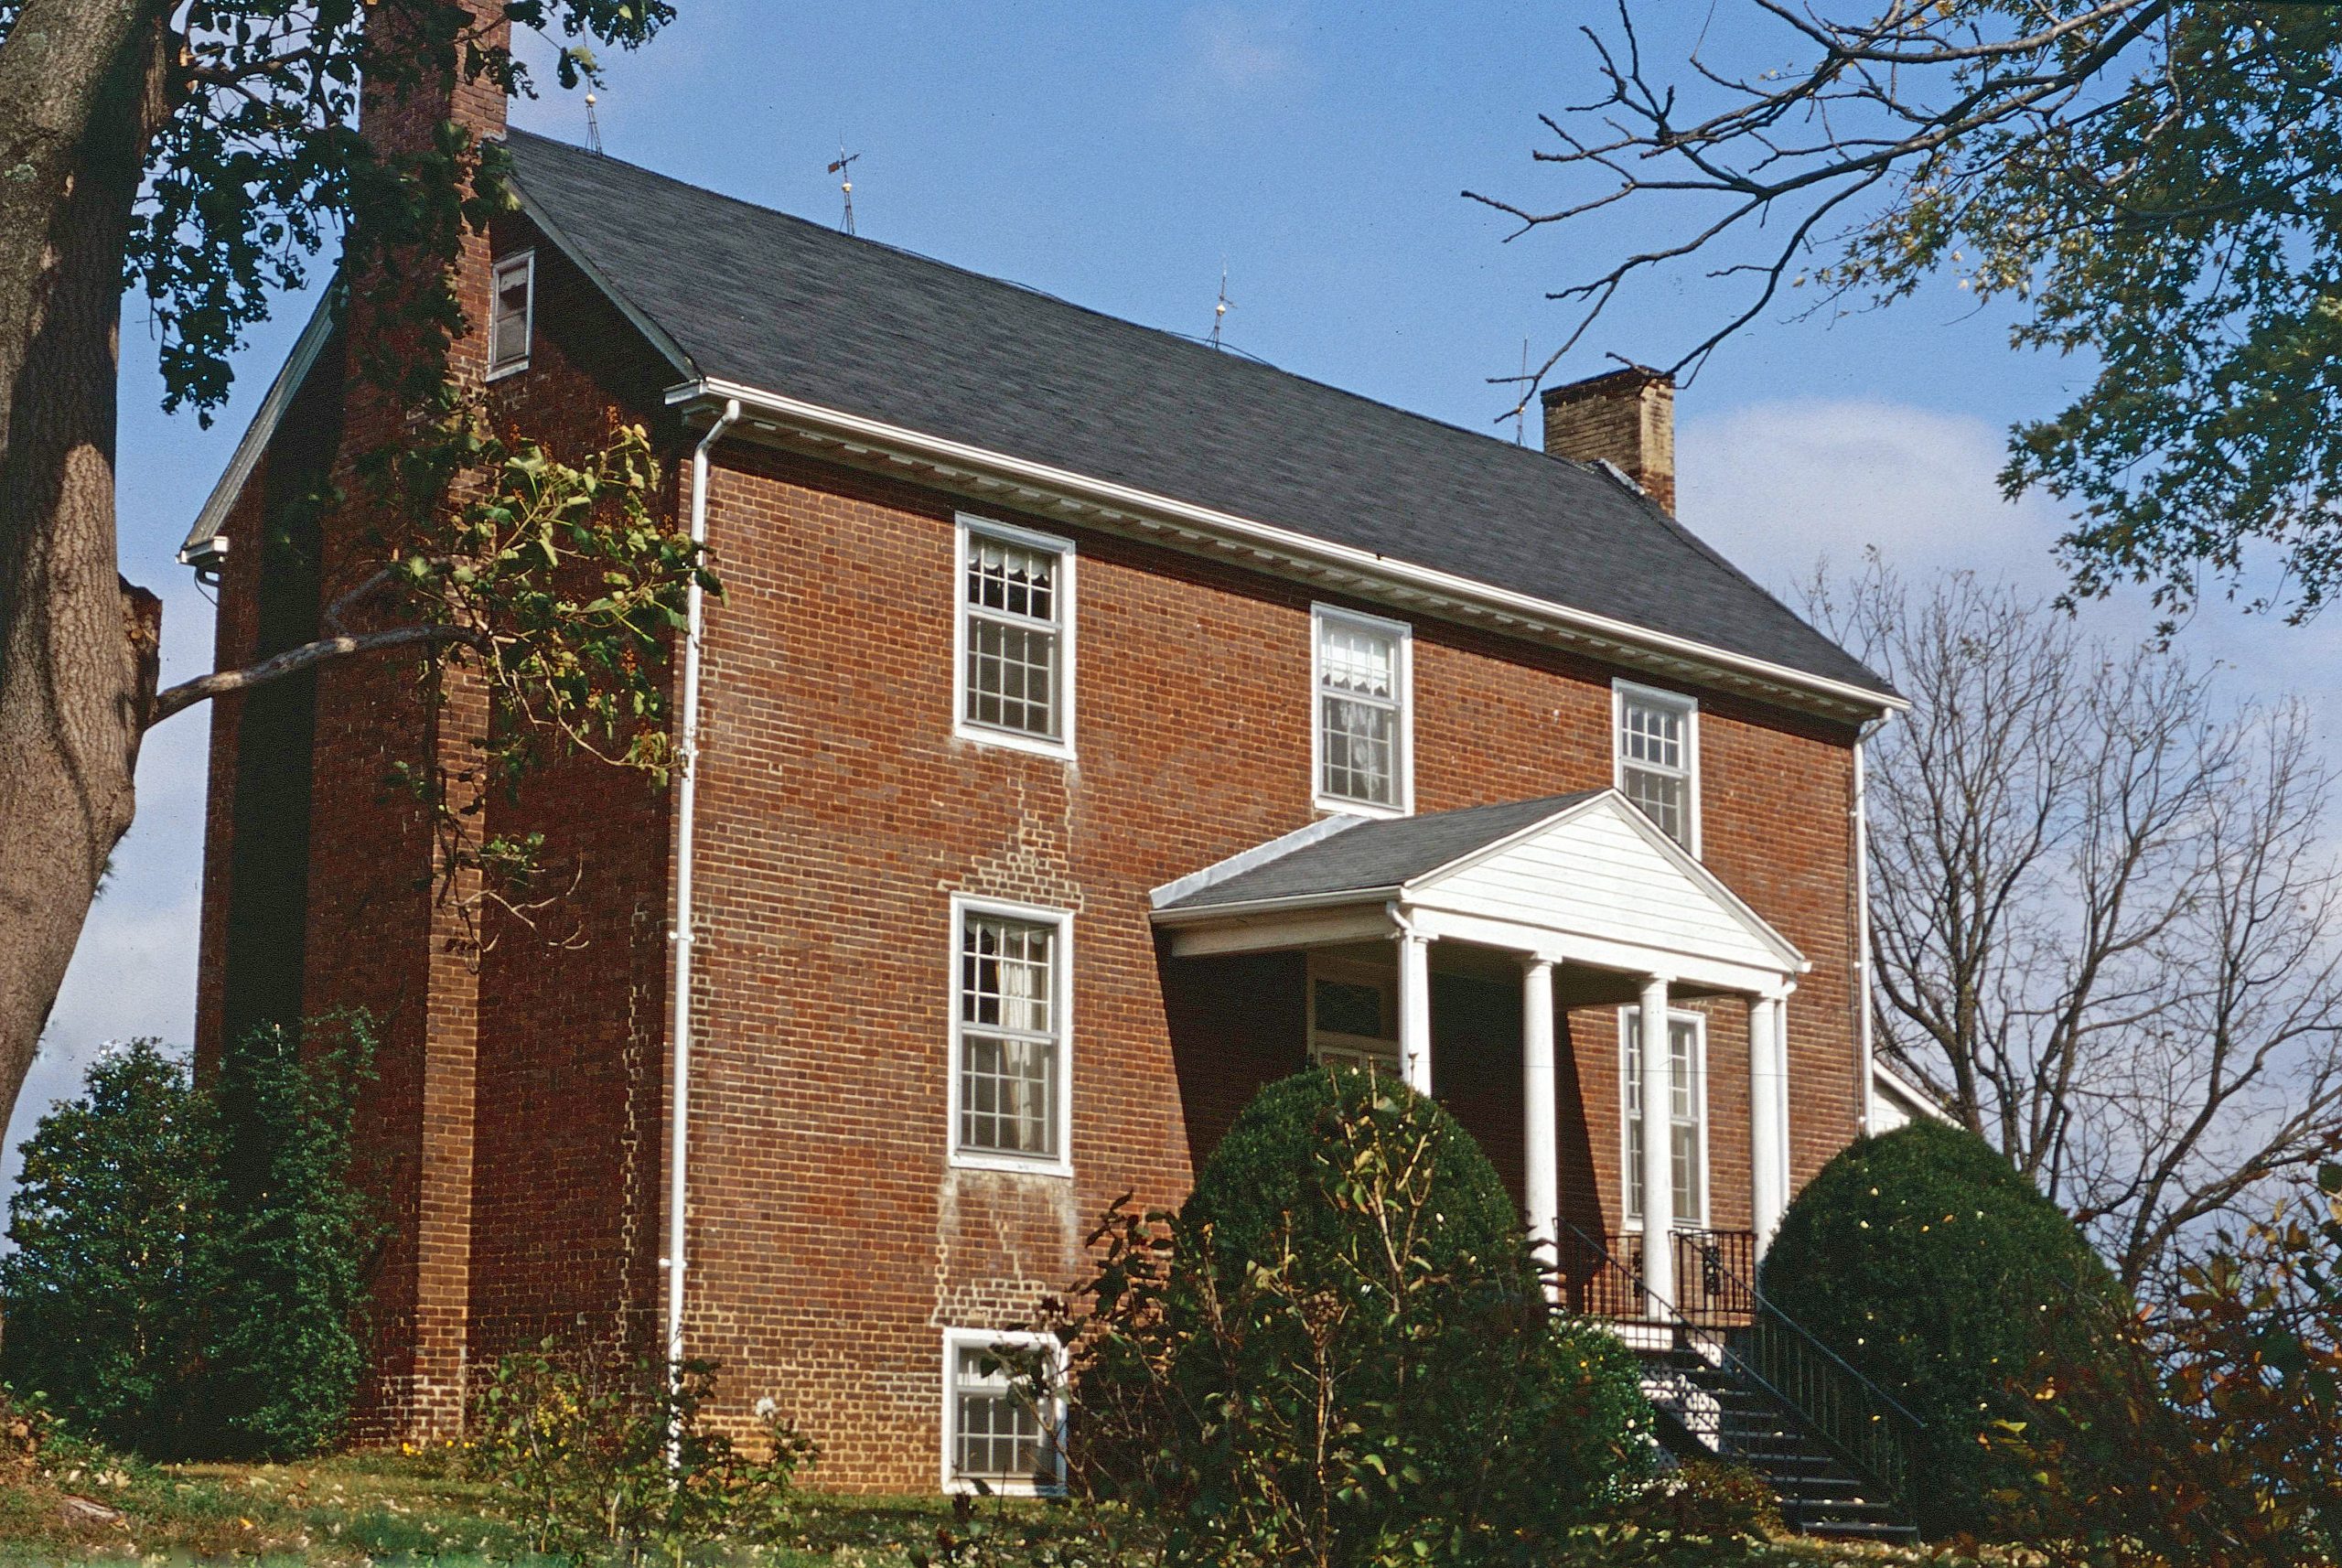 033-0179_Finney-Lee_House_1995_Ext_Front_Oblique_VLR_Online-scaled